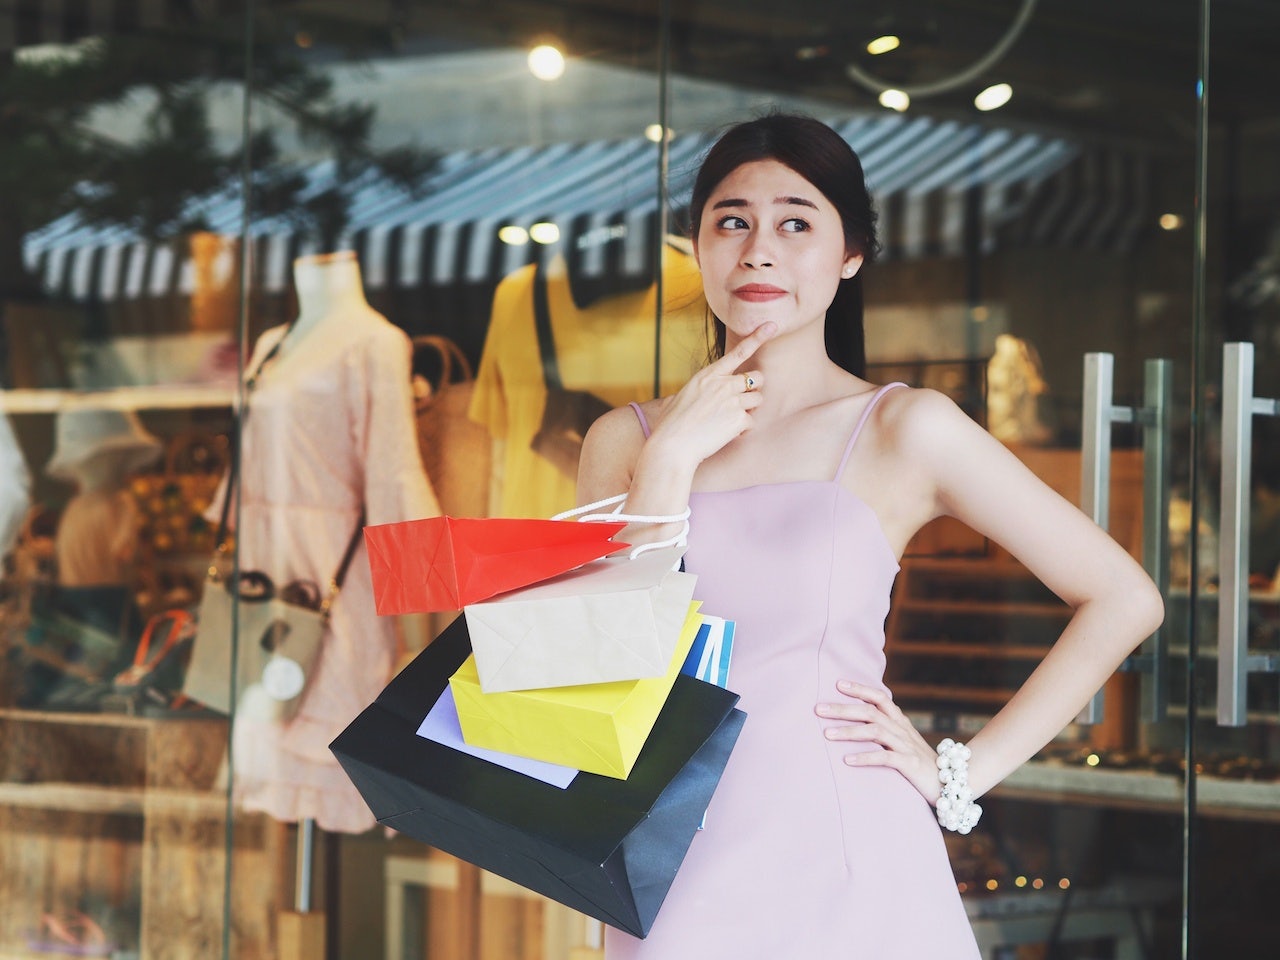 Chinese shoppers abroad are usually expected to spend more than others at luxury stores. Photo: Shutterstock